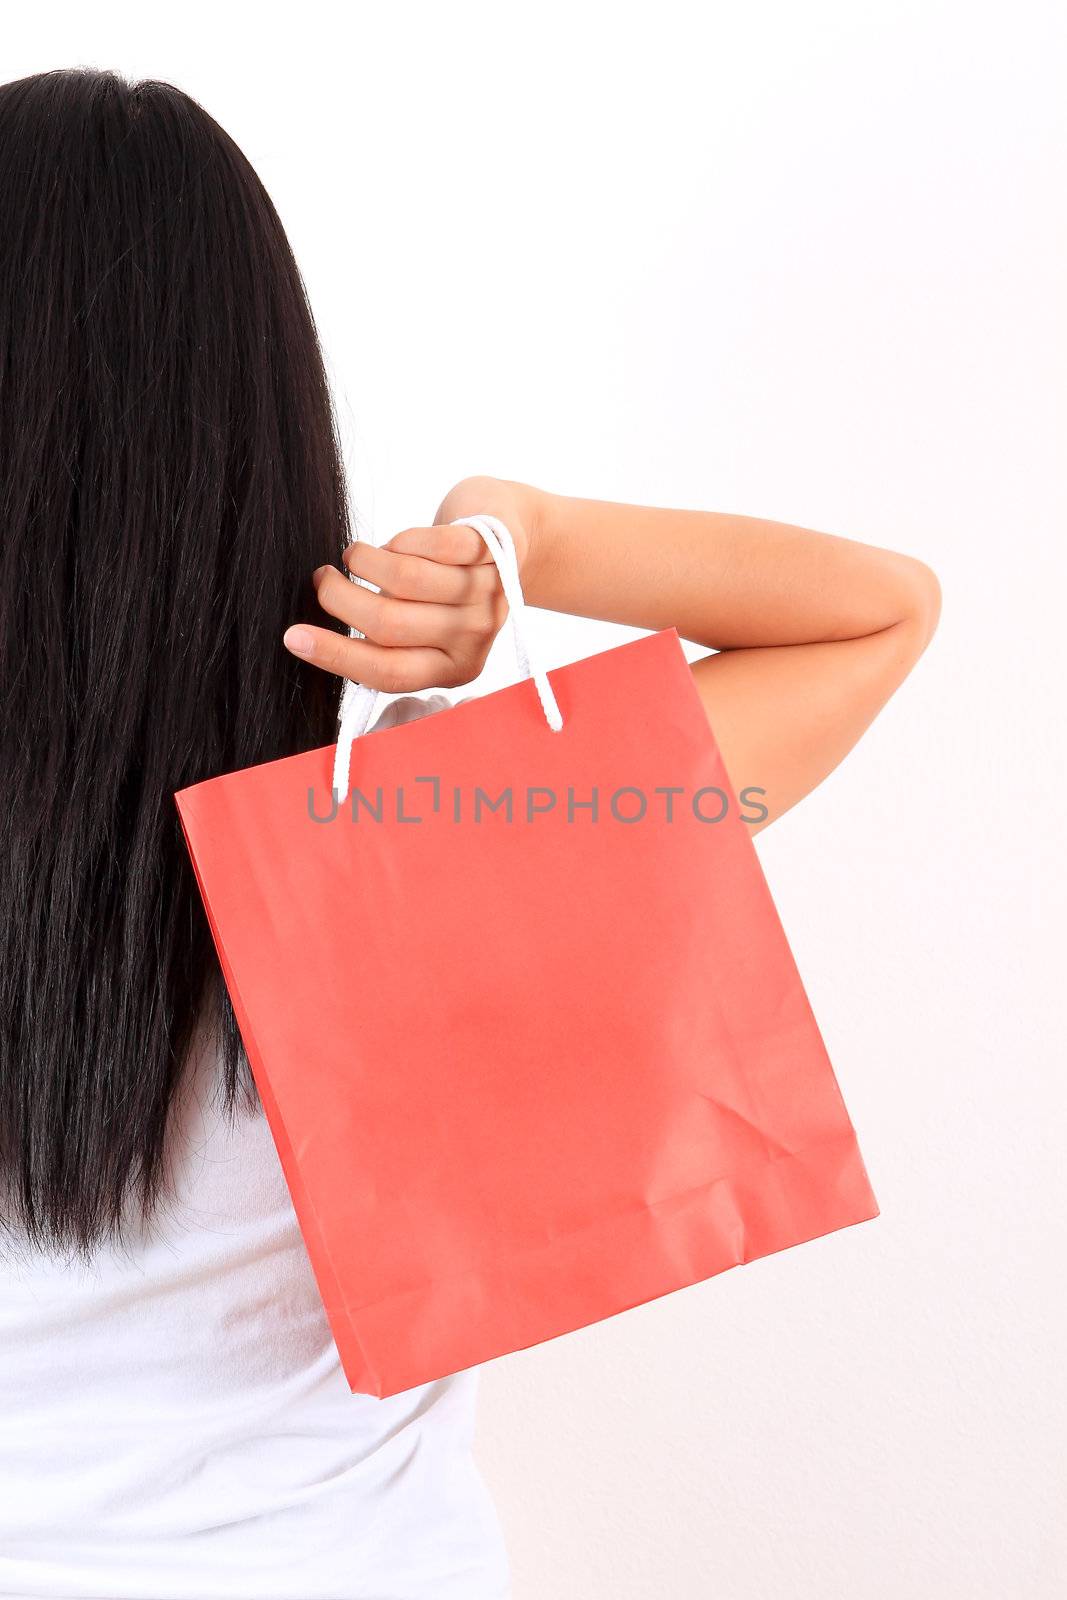 Young model with shopping bag in hands